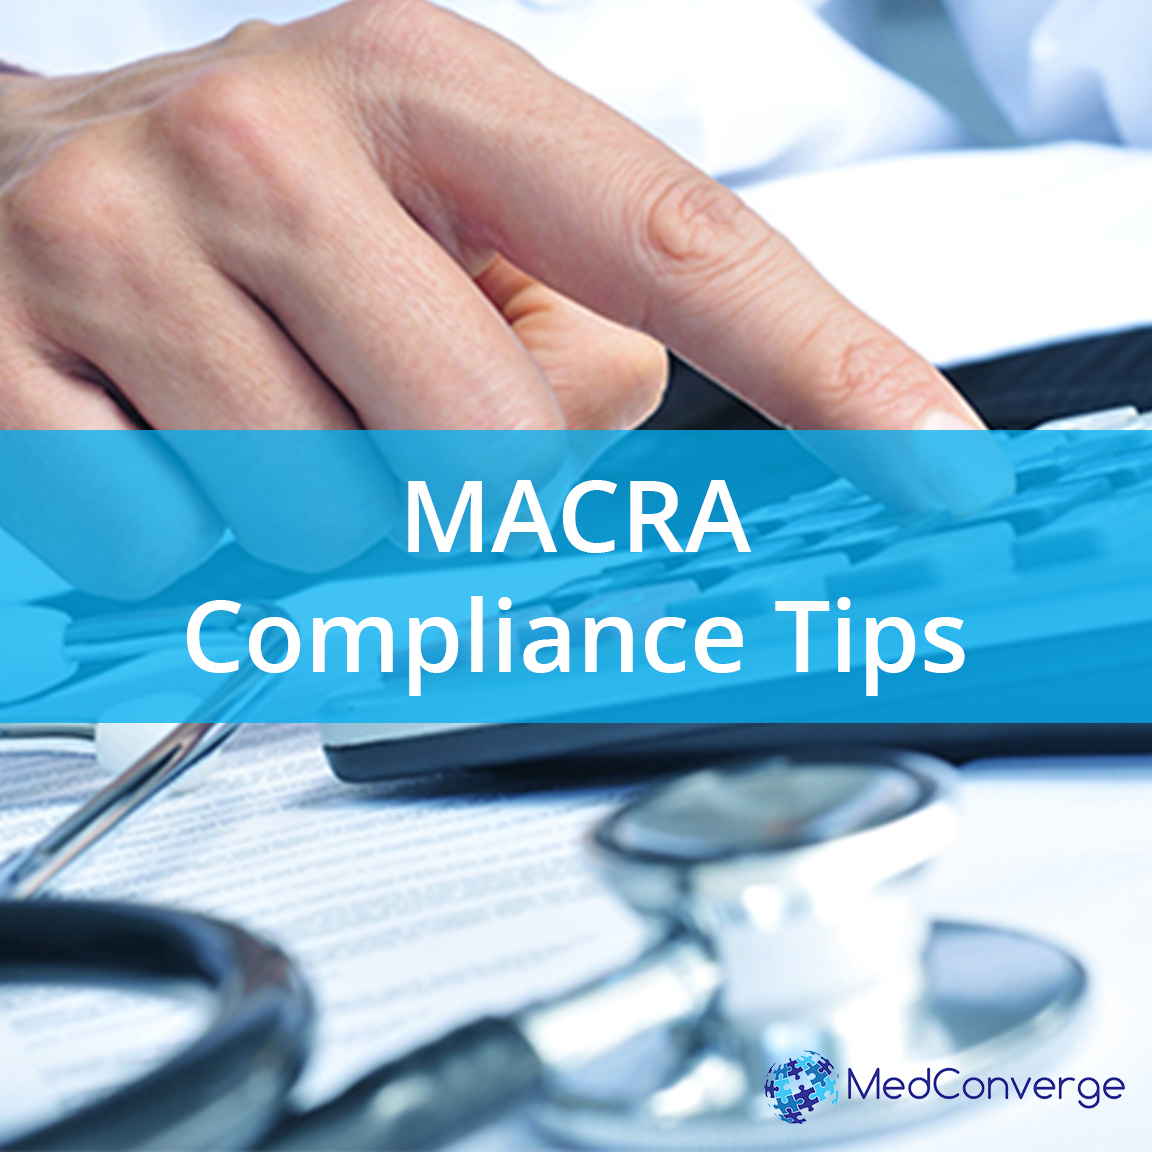 Tips for MACRA Compliance